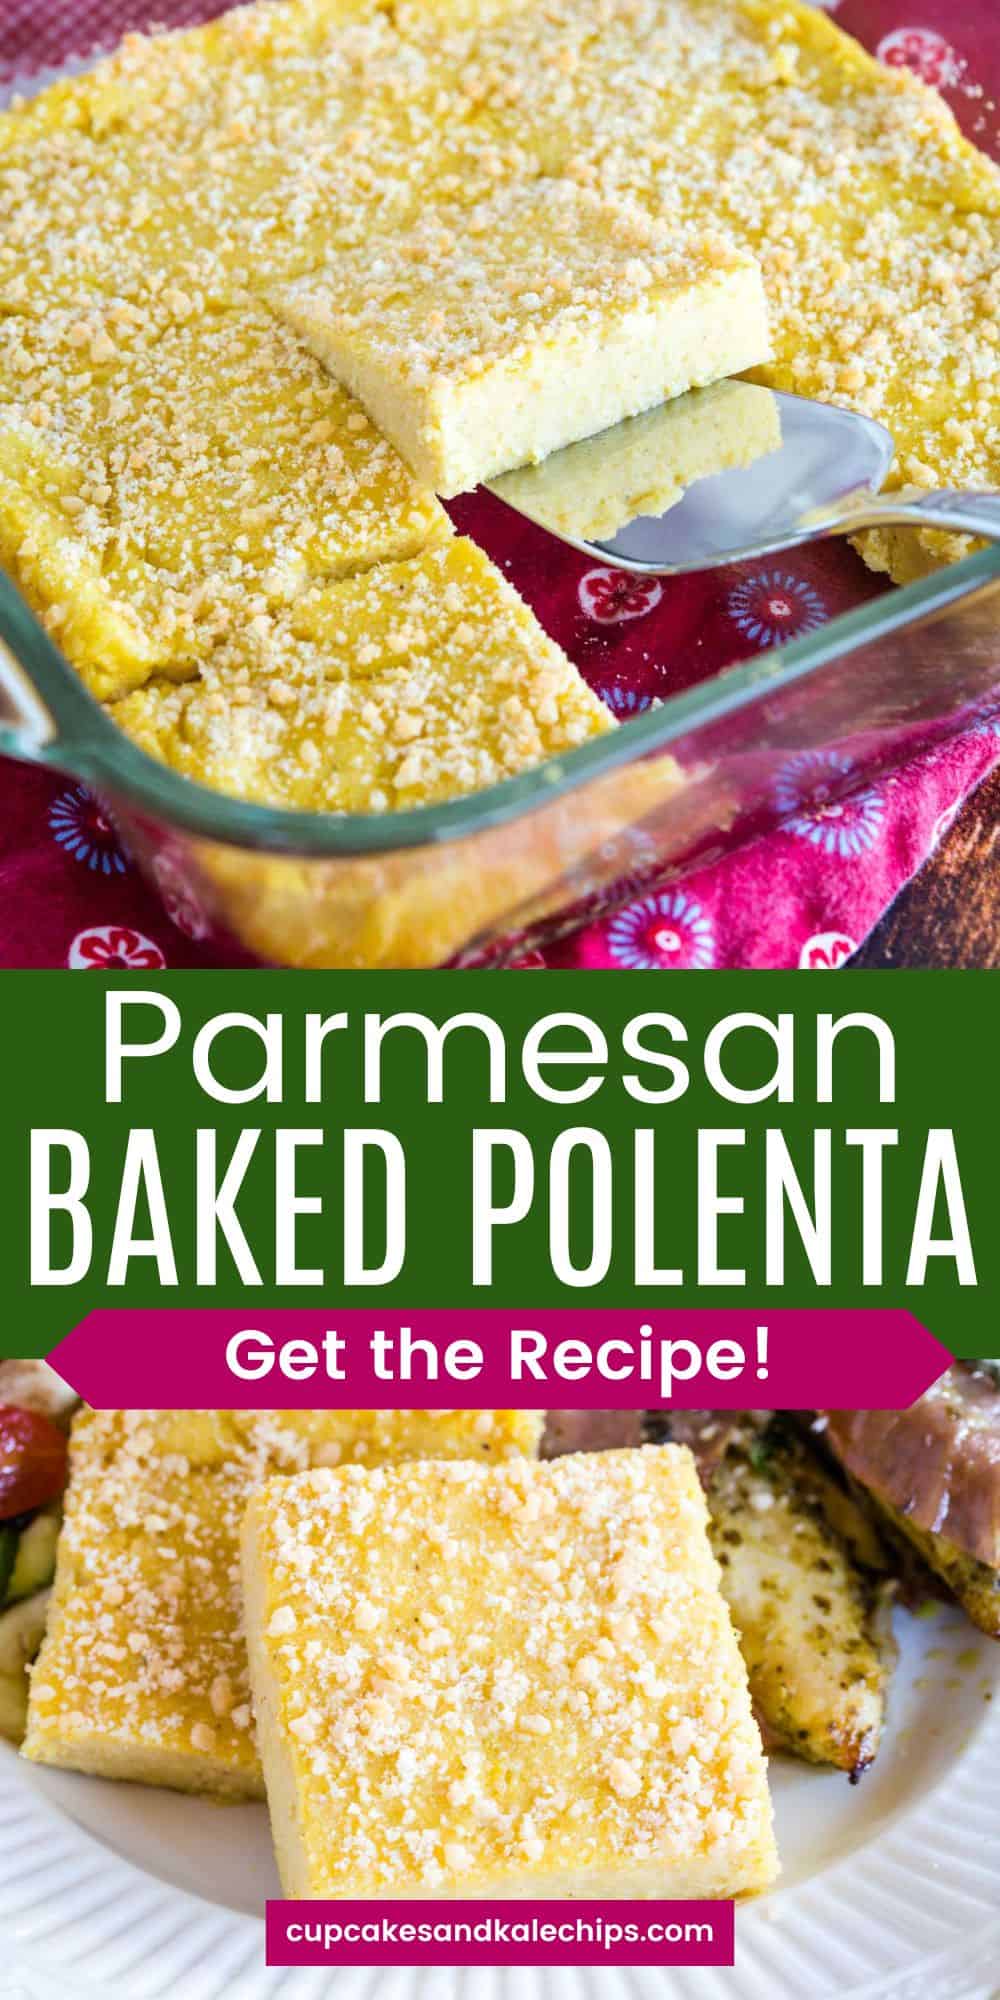 Baked Polenta with Parmesan - easy gluten free side dish!